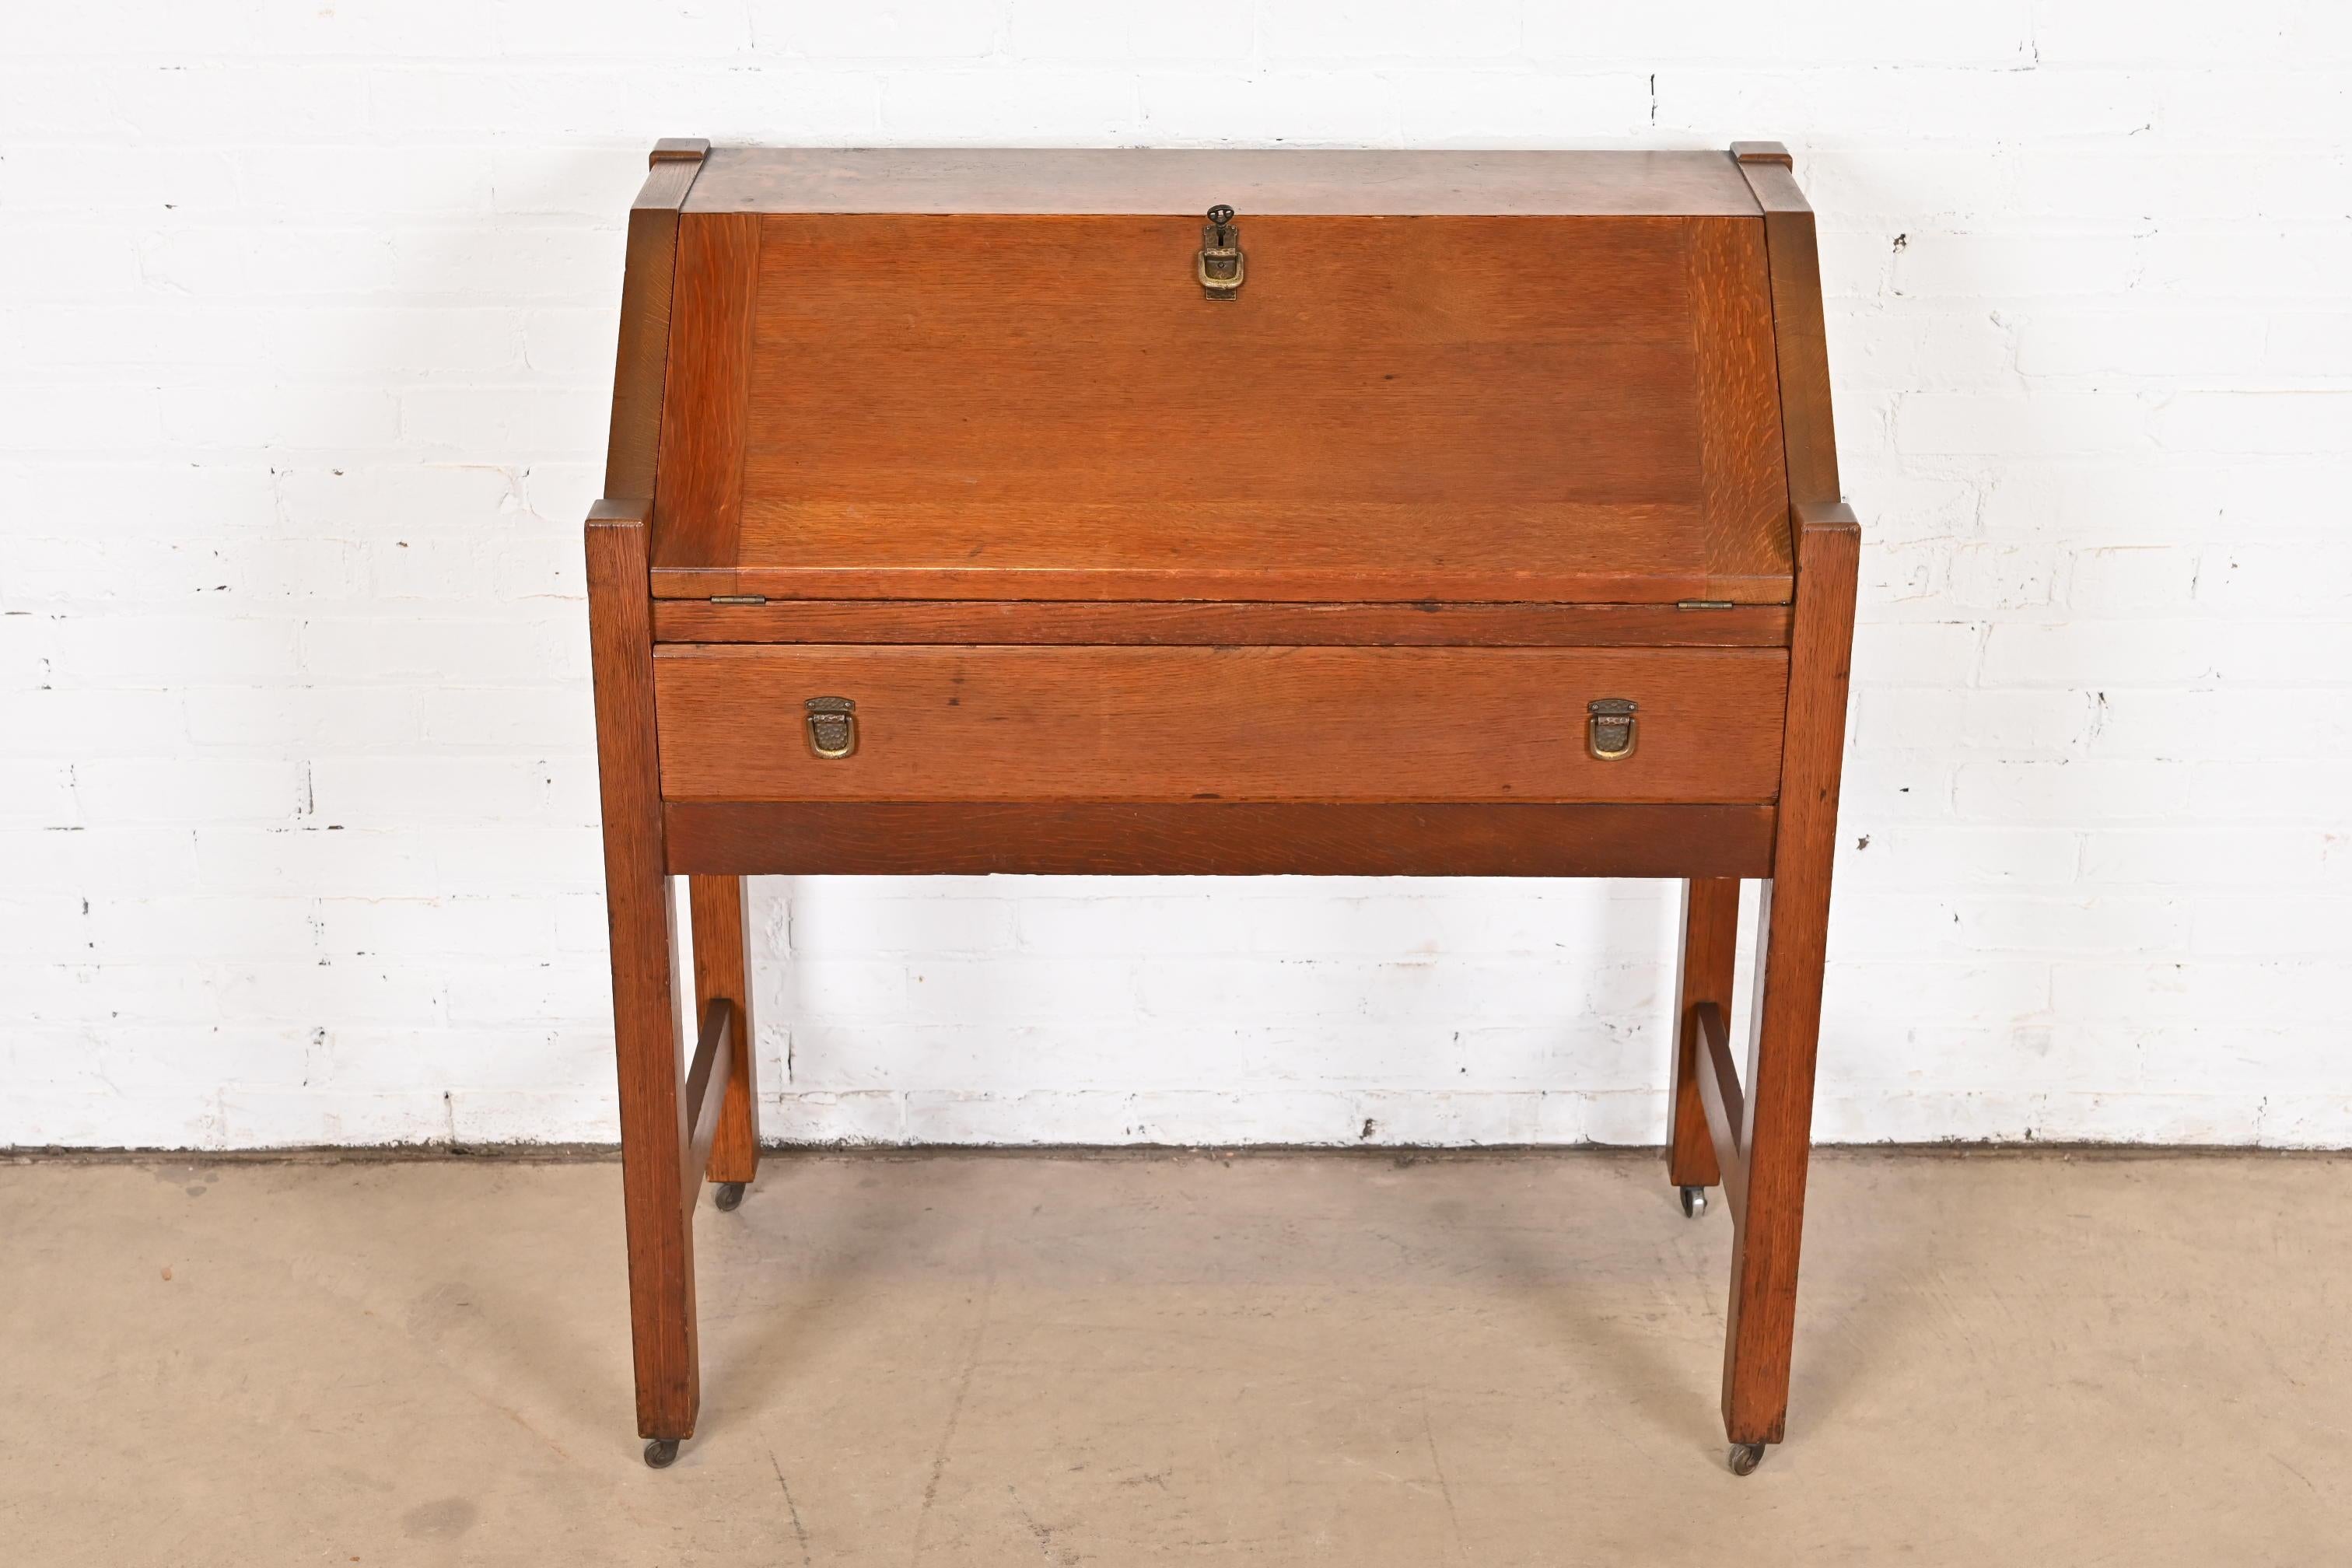 A gorgeous Mission or Arts & Crafts slant front writing desk or secretary desk

In the manner of Stickley Brothers

USA, Circa 1900

Quarter sawn oak, with original hammered copper hardware.

Measures: 36